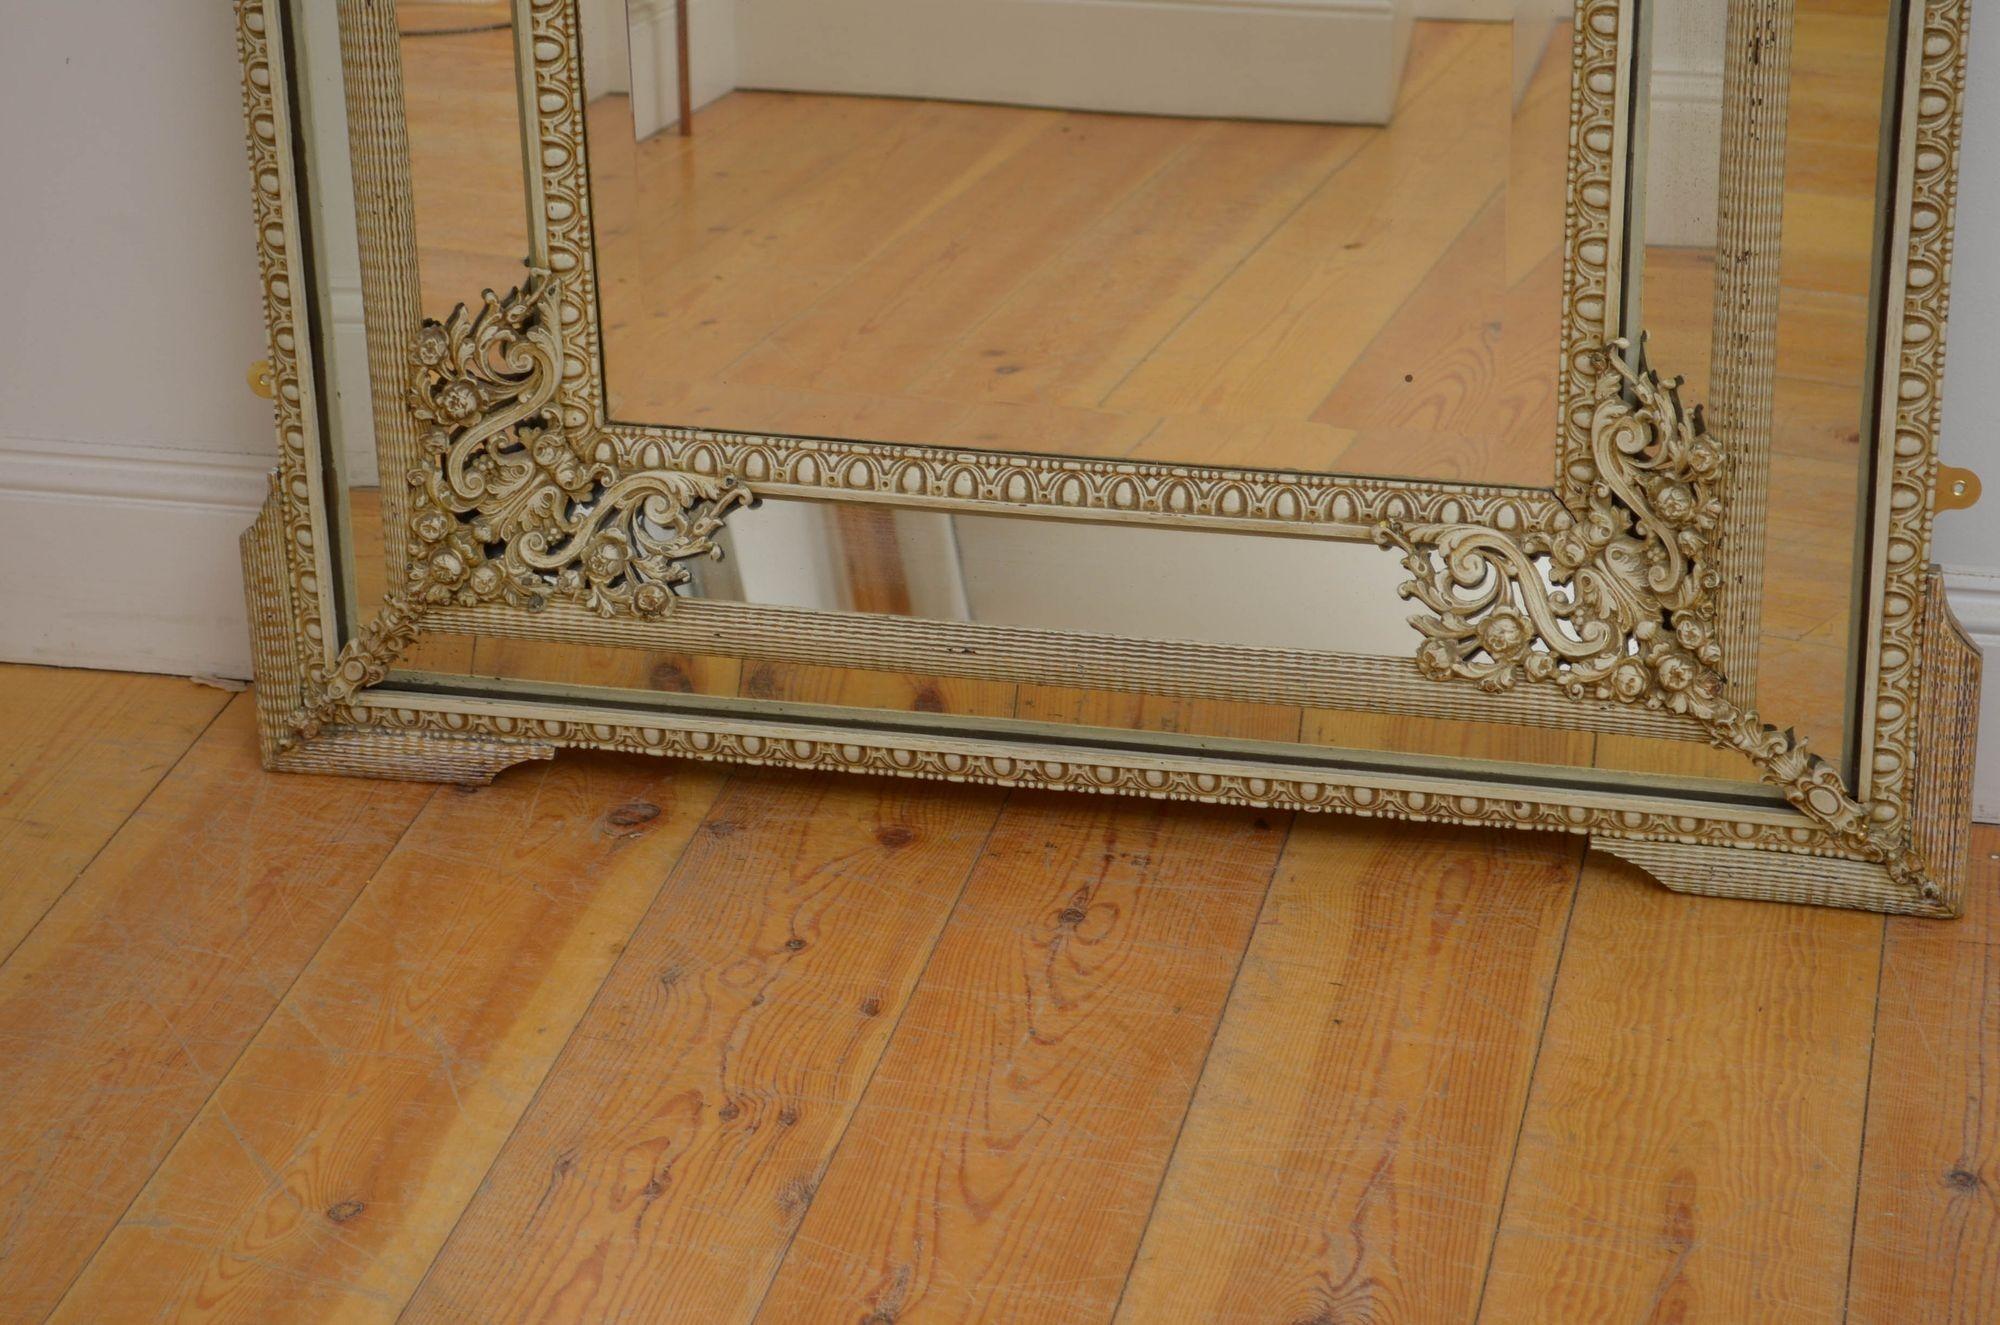 Sn5389 A 19th century French, wall mirror with double cushioning, having original glass with foxing and minor imperfections in egg and dart carved frame with floral metal mounts to the corners and ripple effect throughout, all flanked by shaped